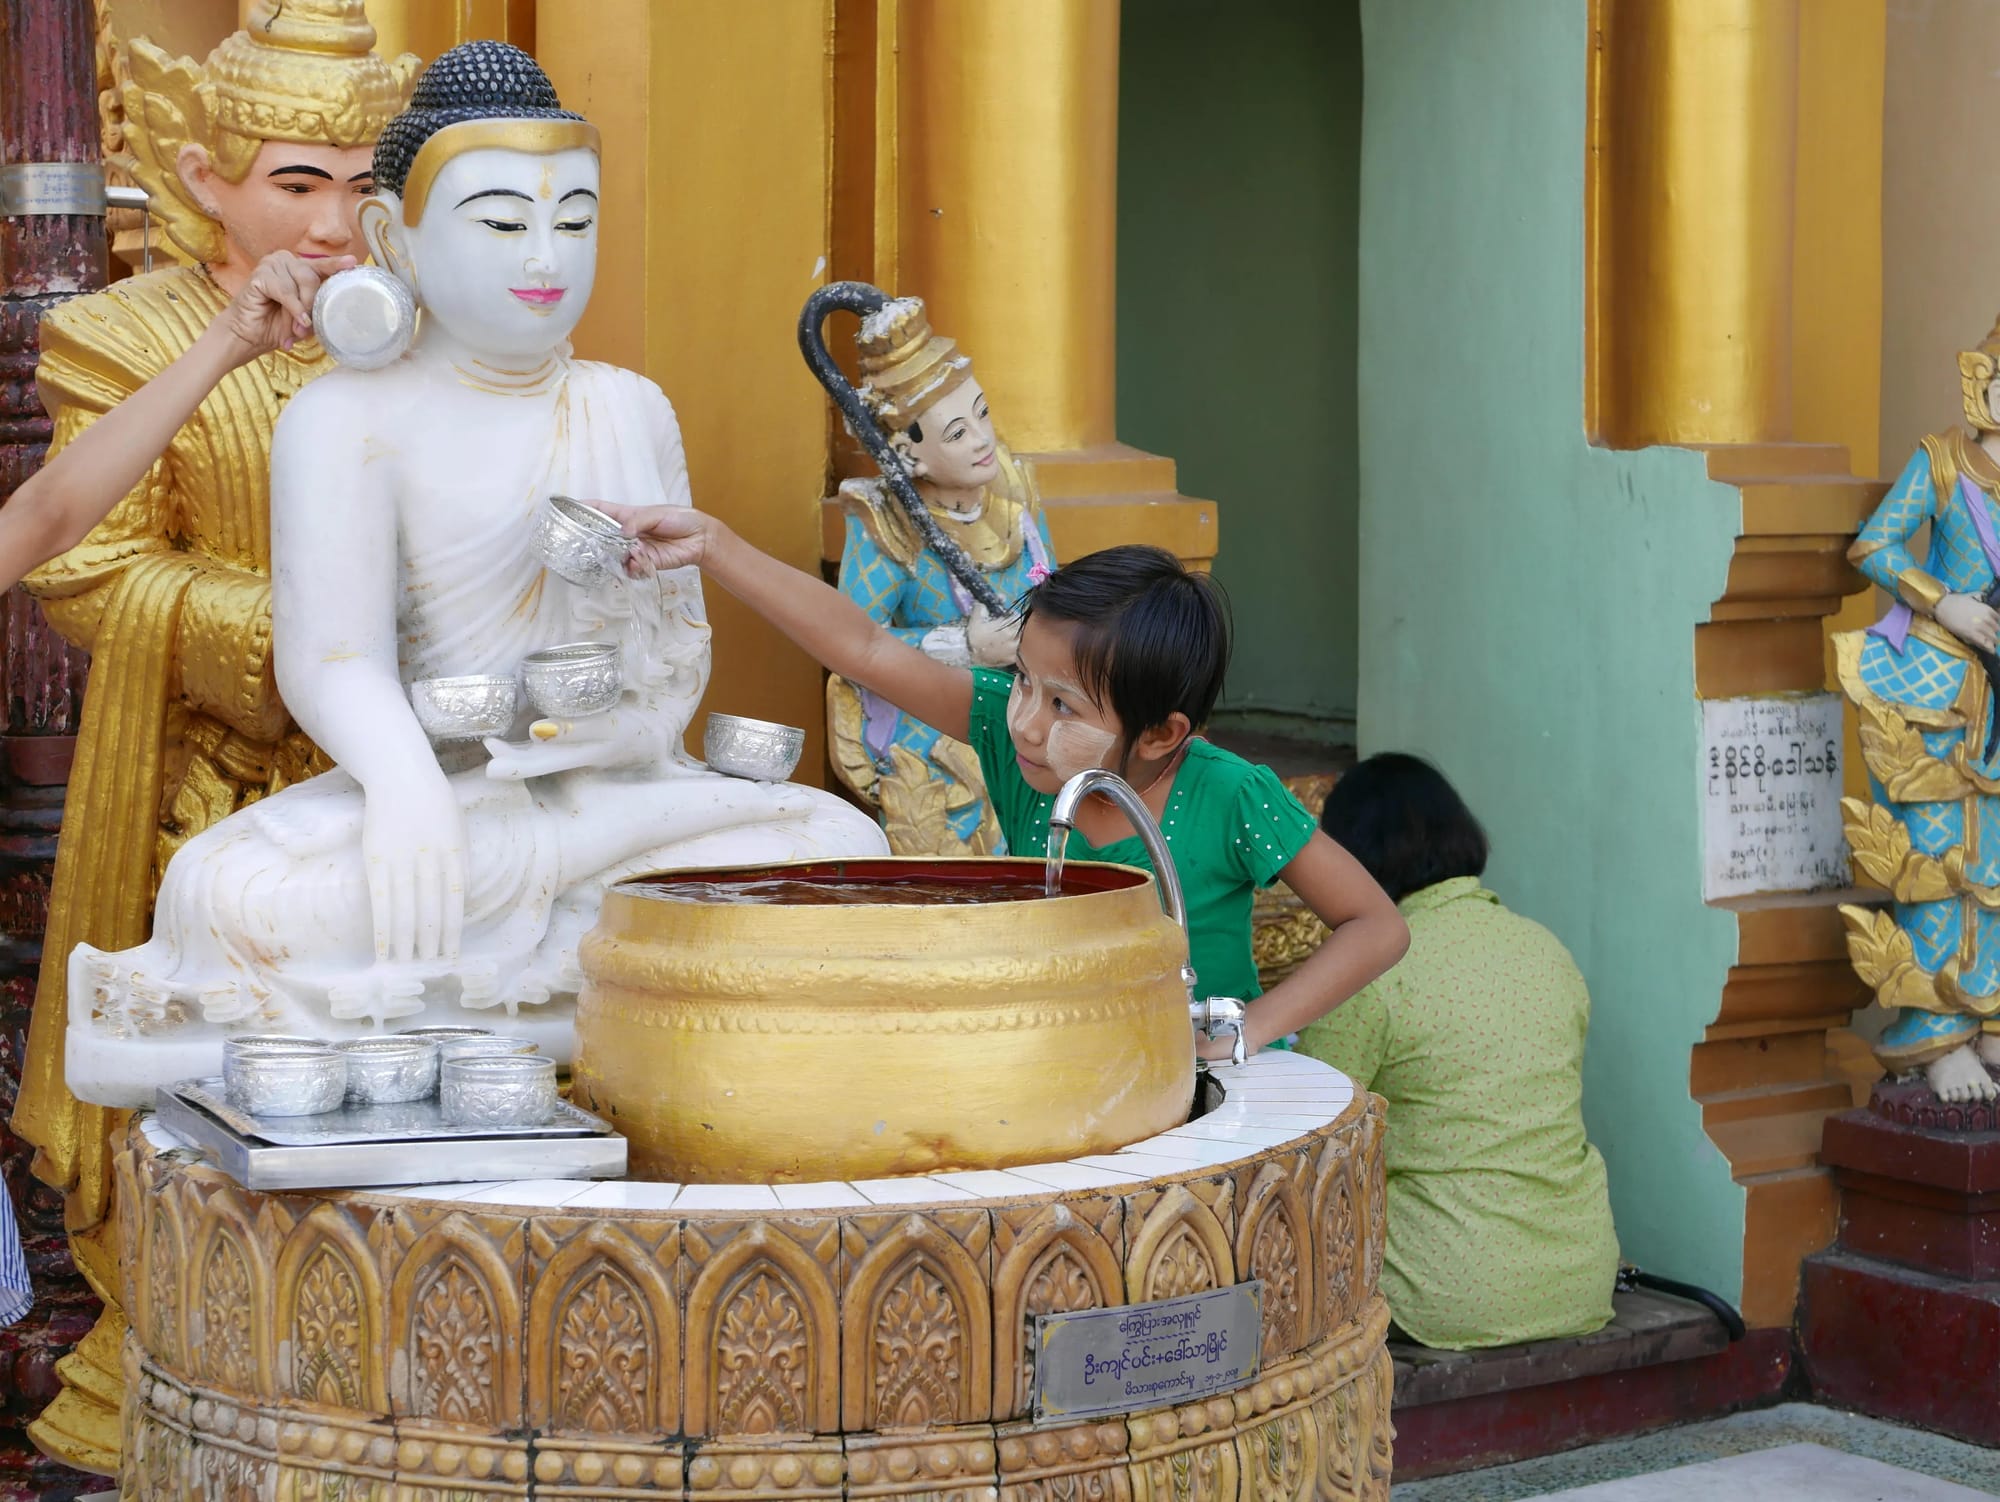 Photo by Author — a worshipper at the Shwedagon Pagoda